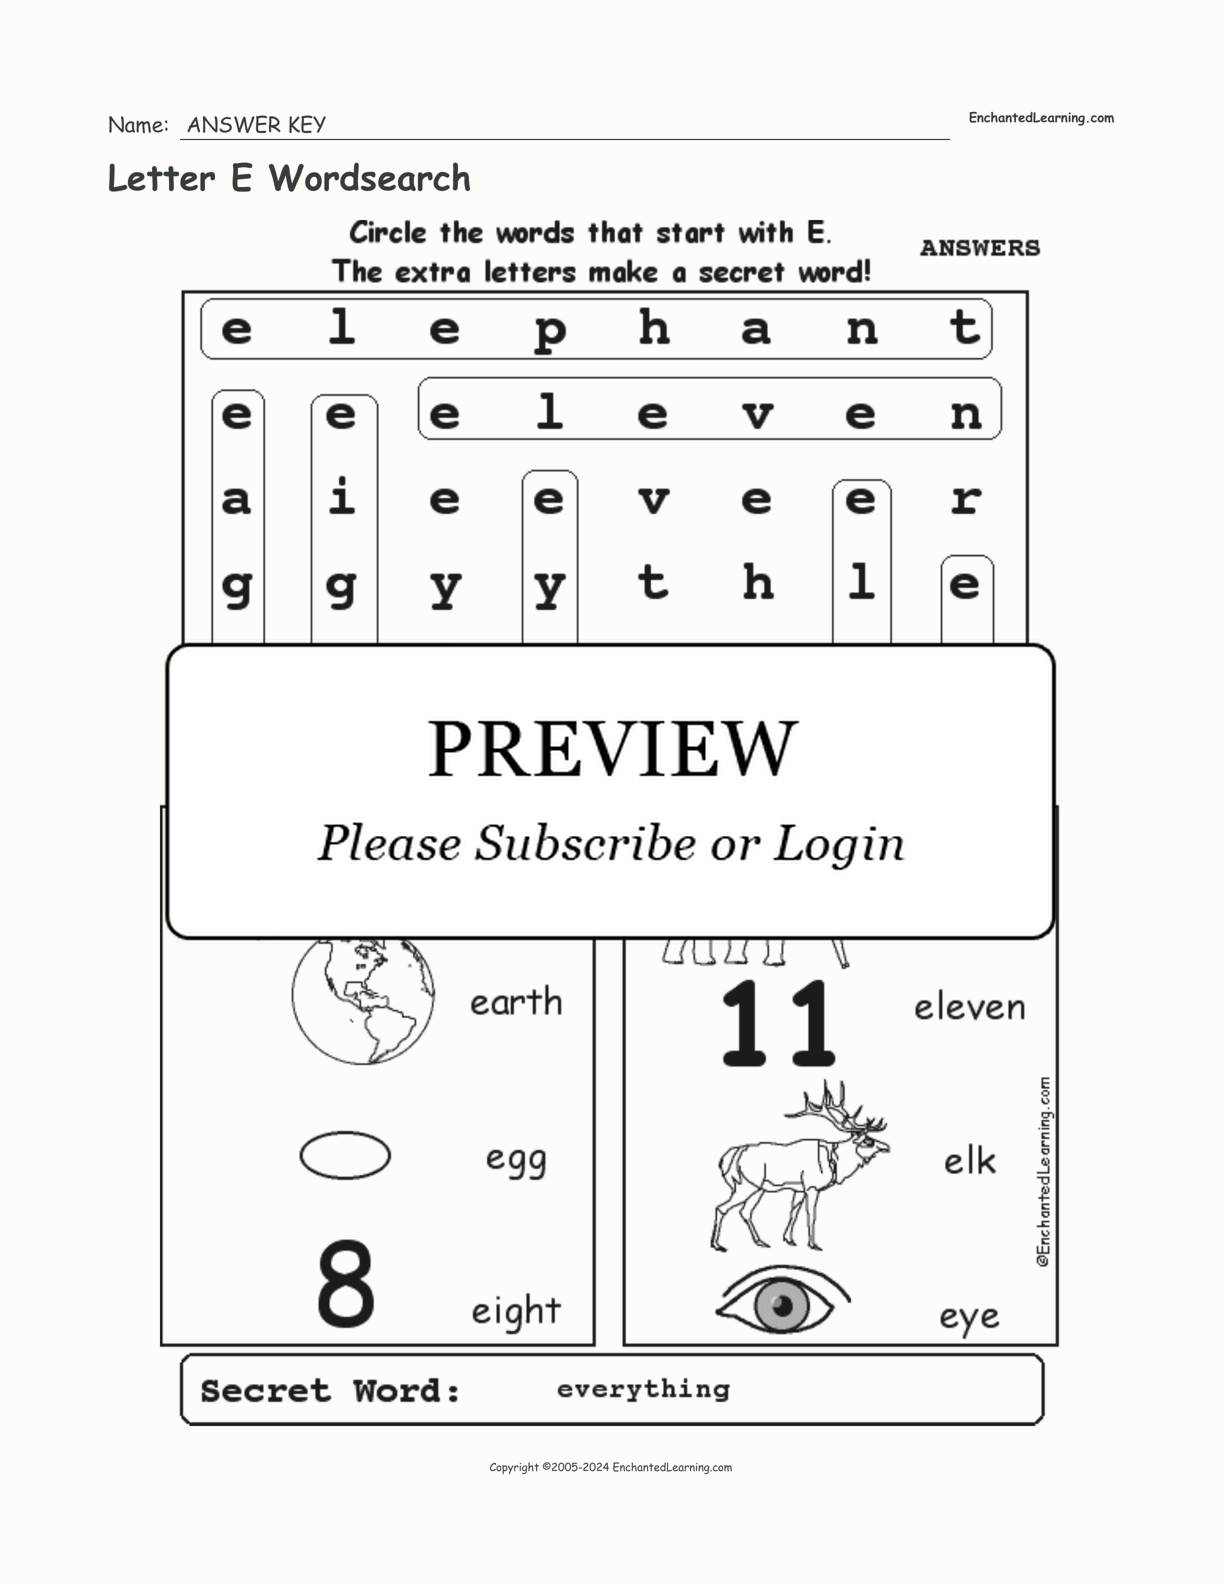 Letter E Wordsearch interactive worksheet page 2